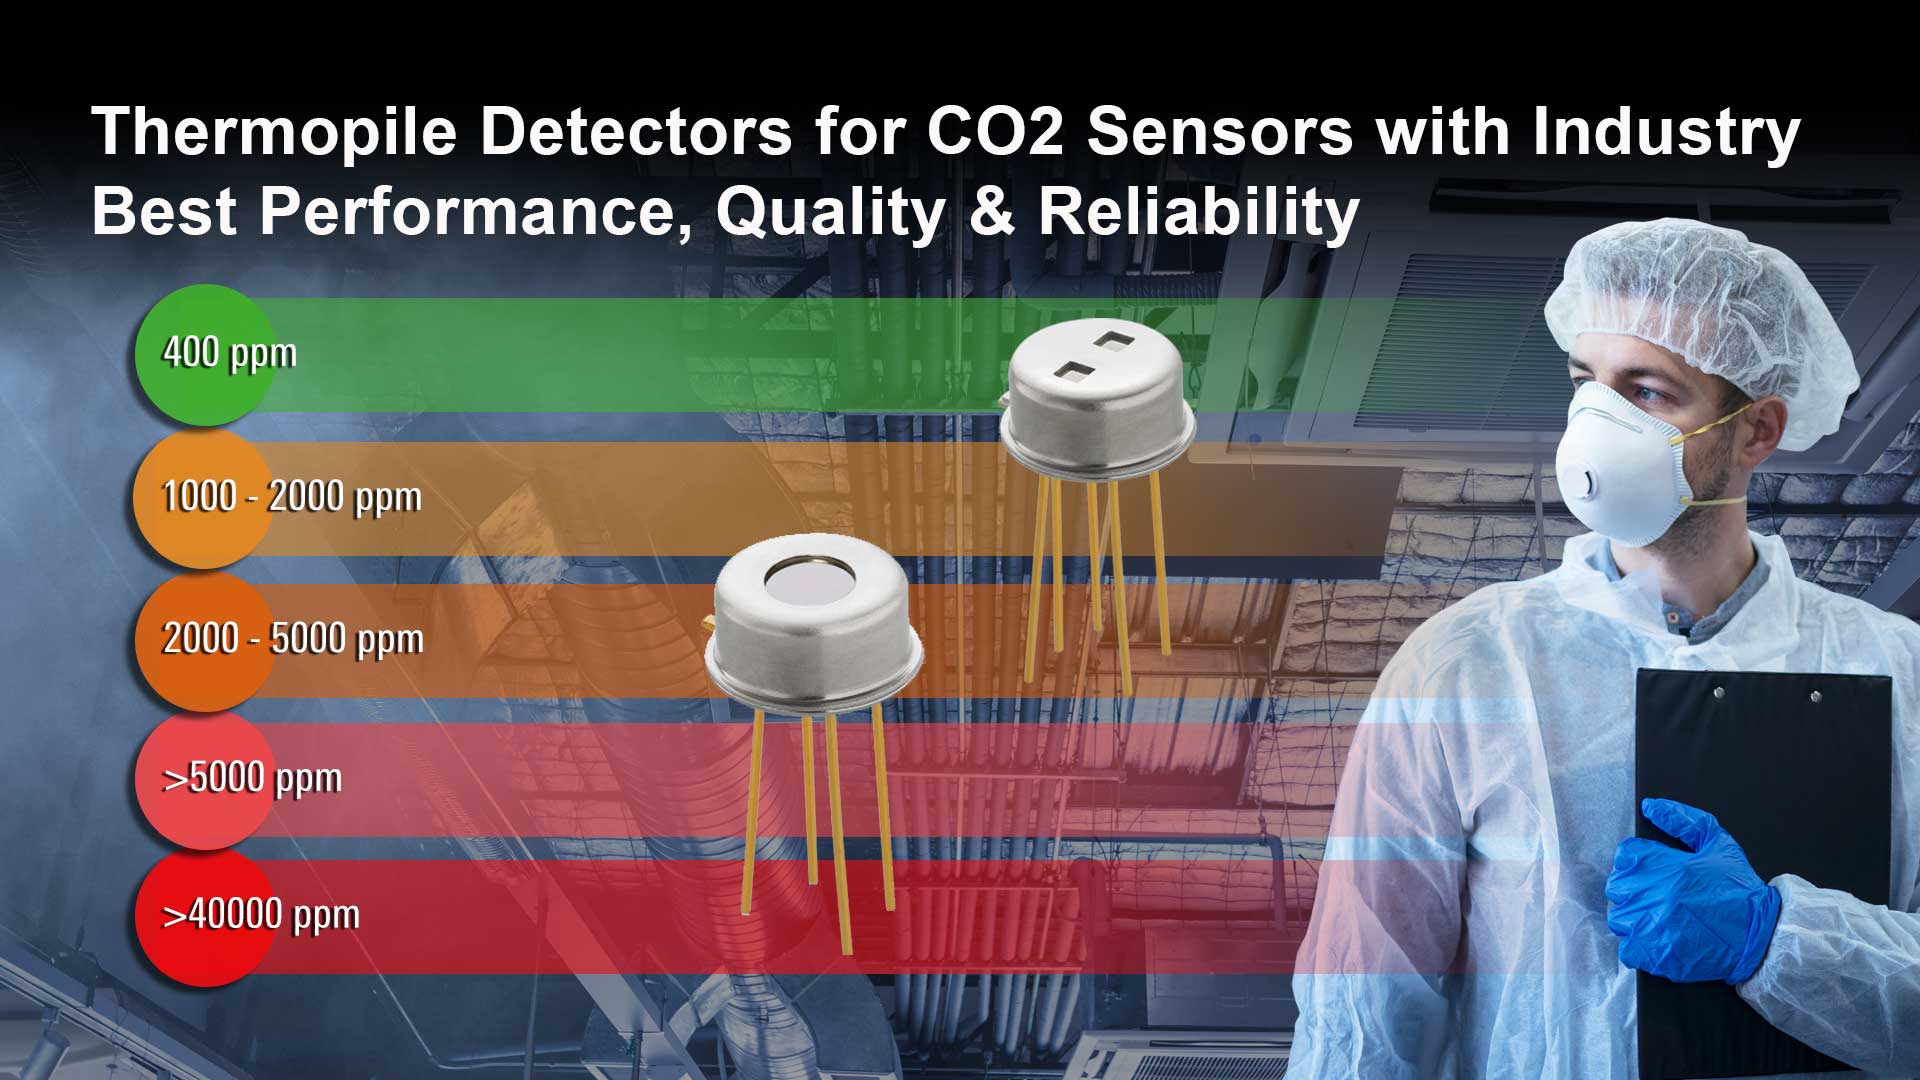 New Thermopile-Based Detectors for CO2 Sensors